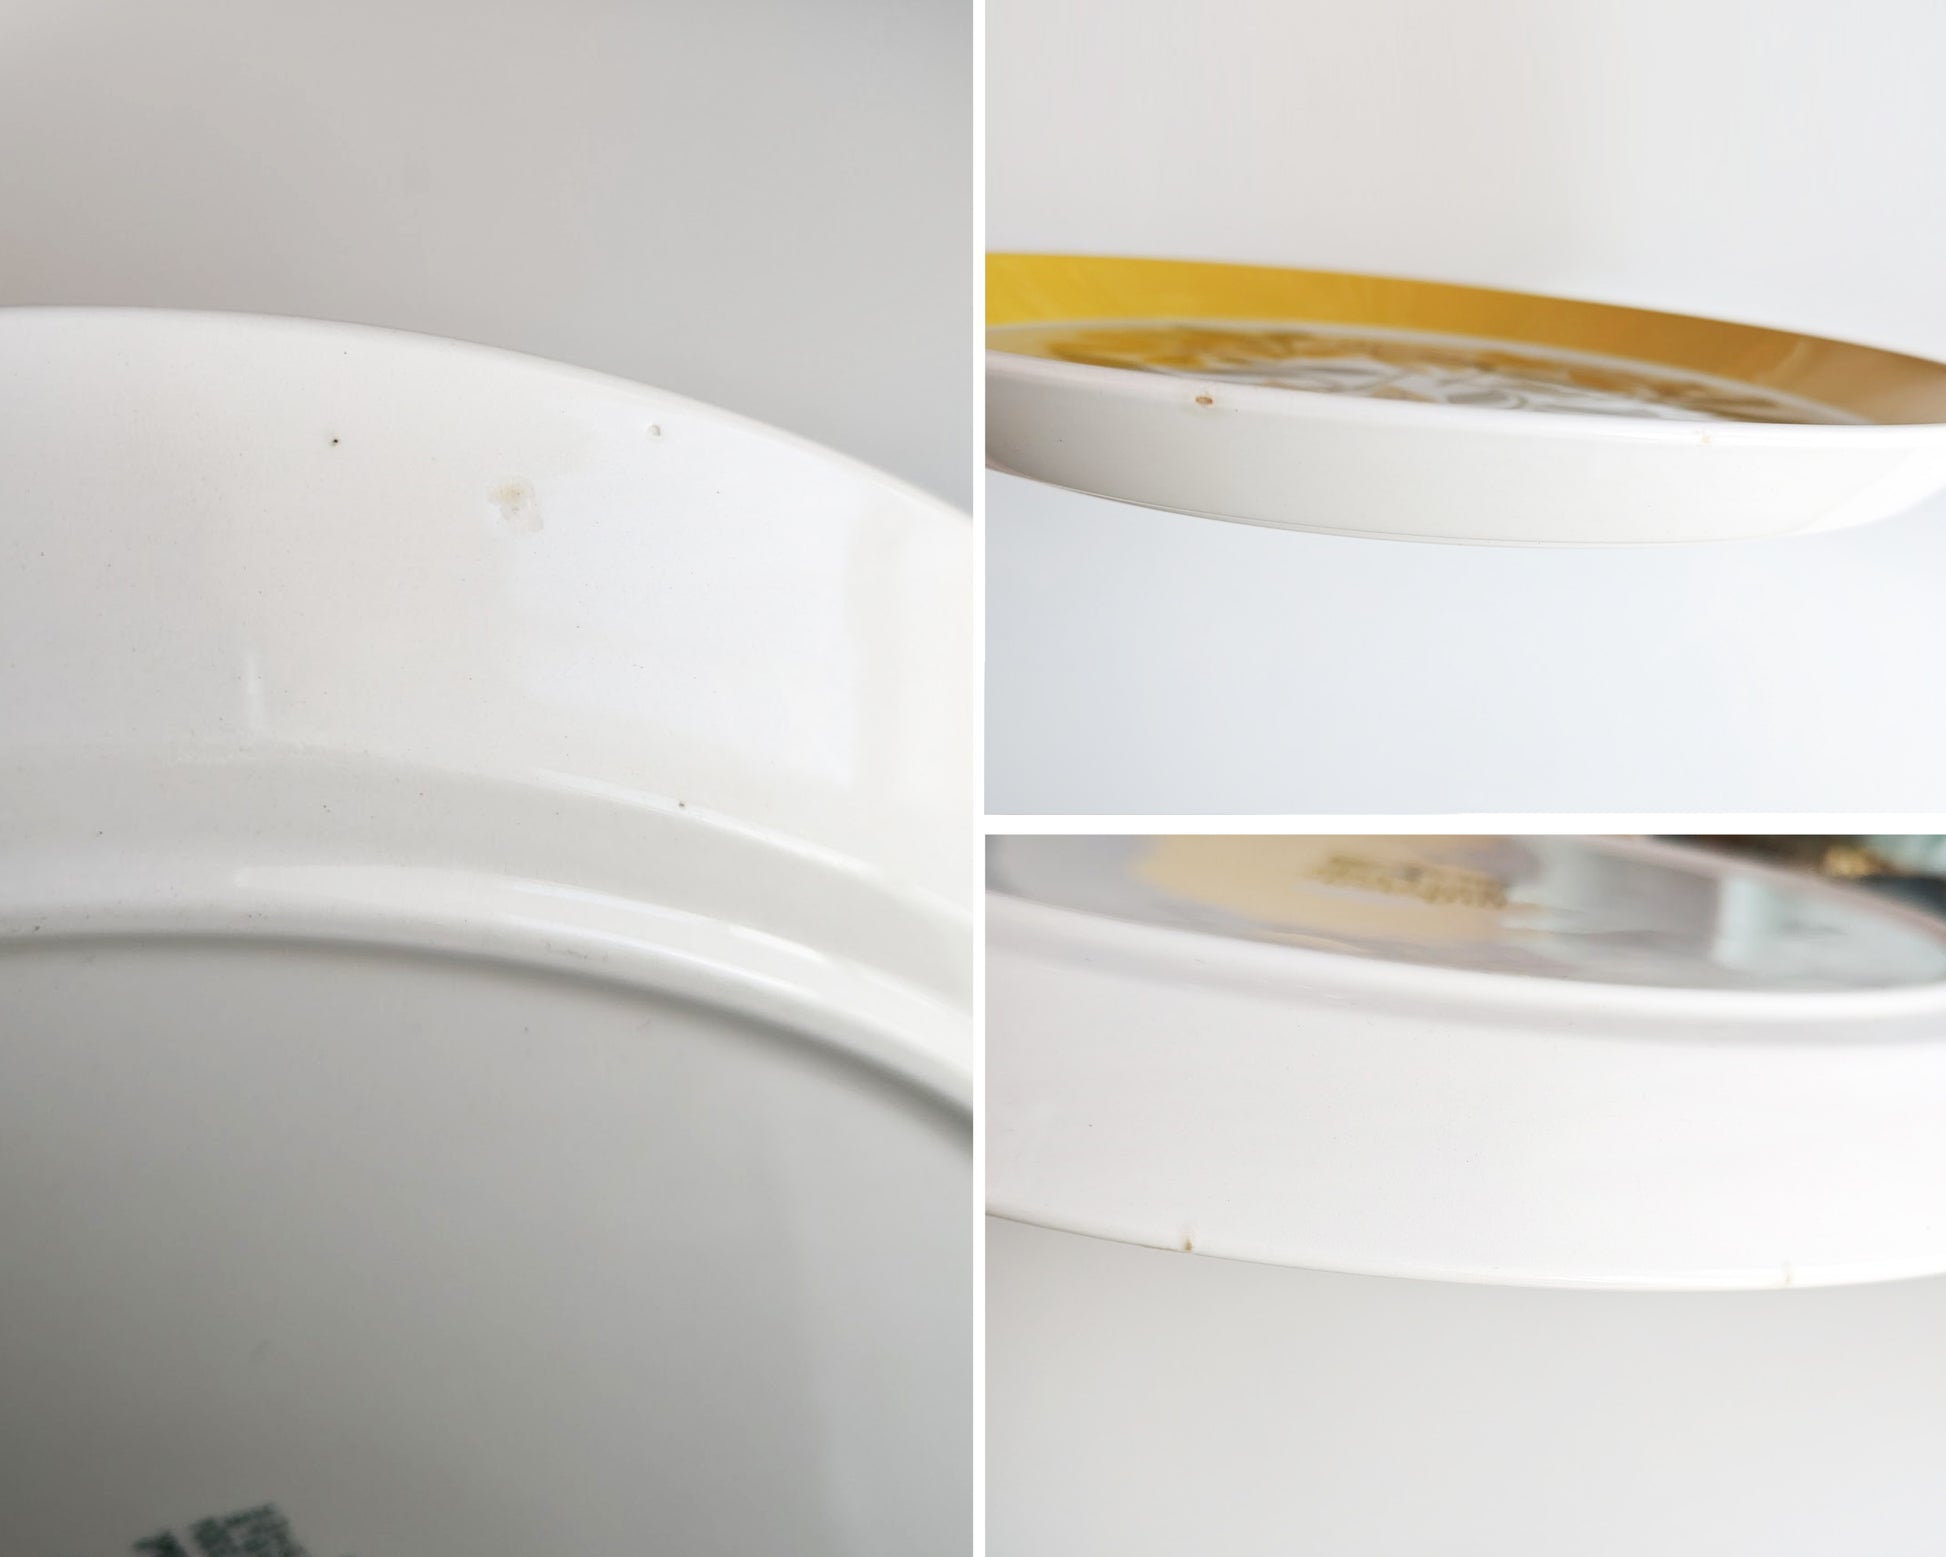 A photo collage of small flaws on the plates which may be small factory flaws or chips in the ceramic